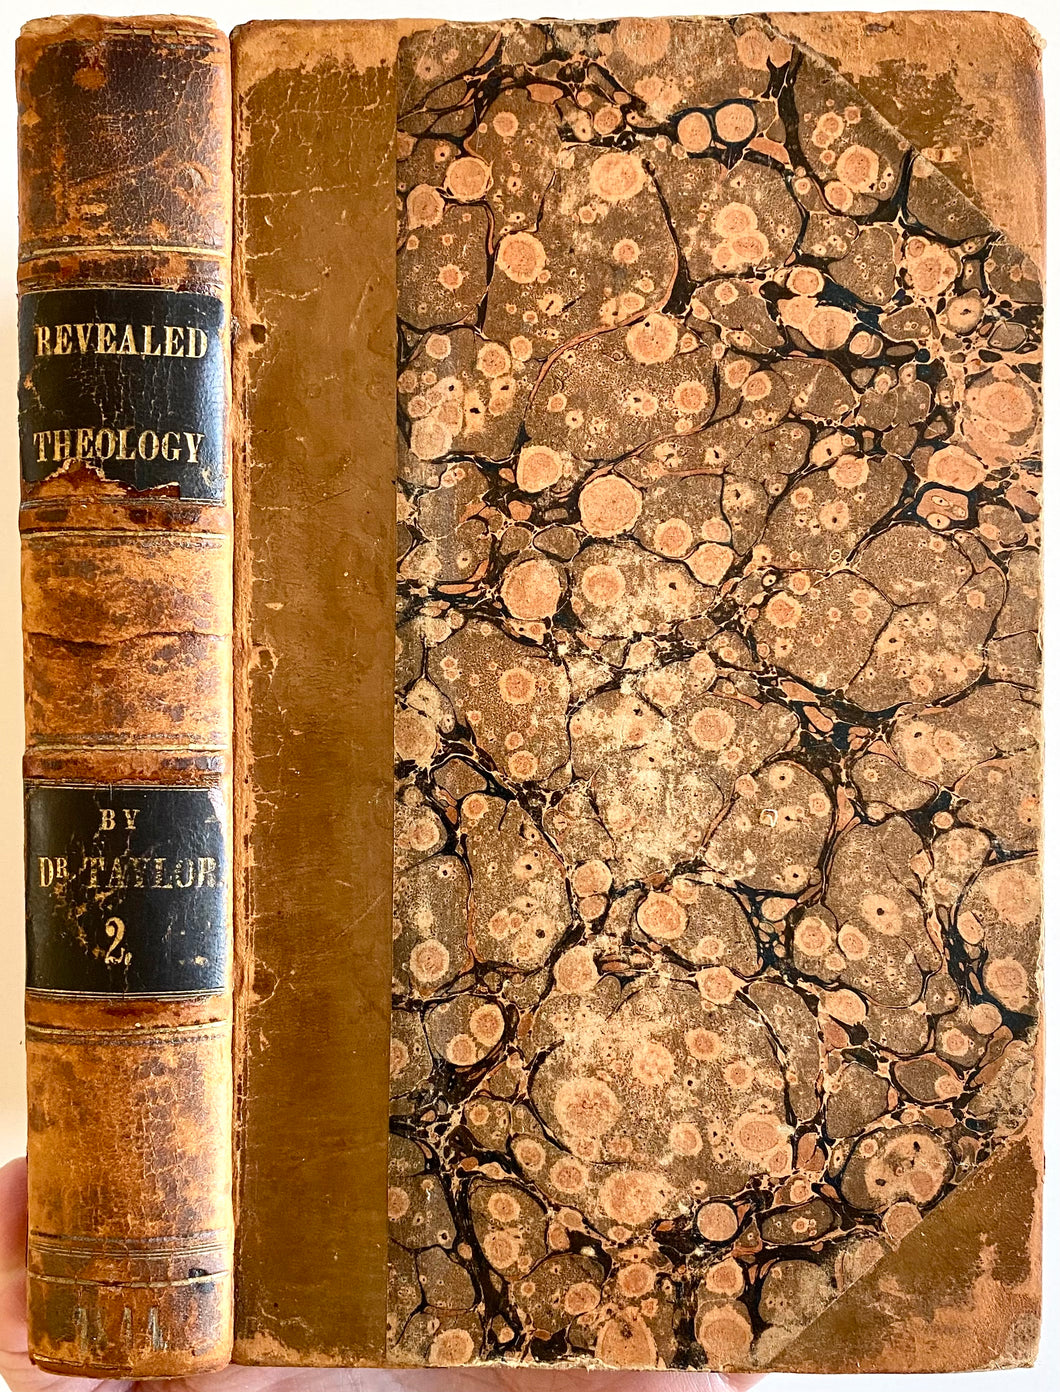 1844 NATHANIEL W. TAYLOR. 700pp Unpublished Manuscript by Important Great Awakening Theologian.